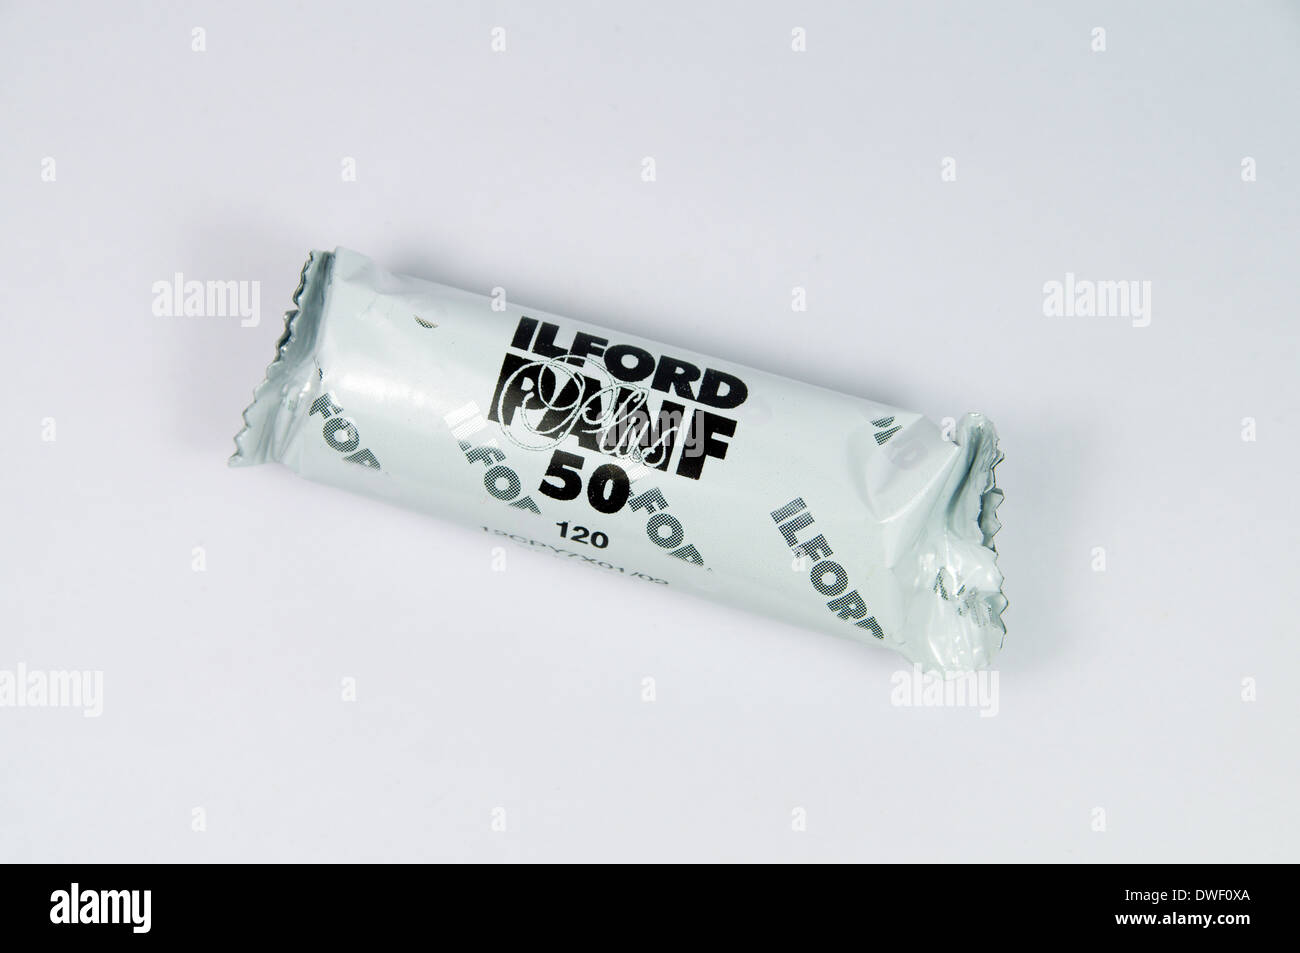 Roll of Ilford Pan F Black and White film in 120 roll film format. Stock Photo